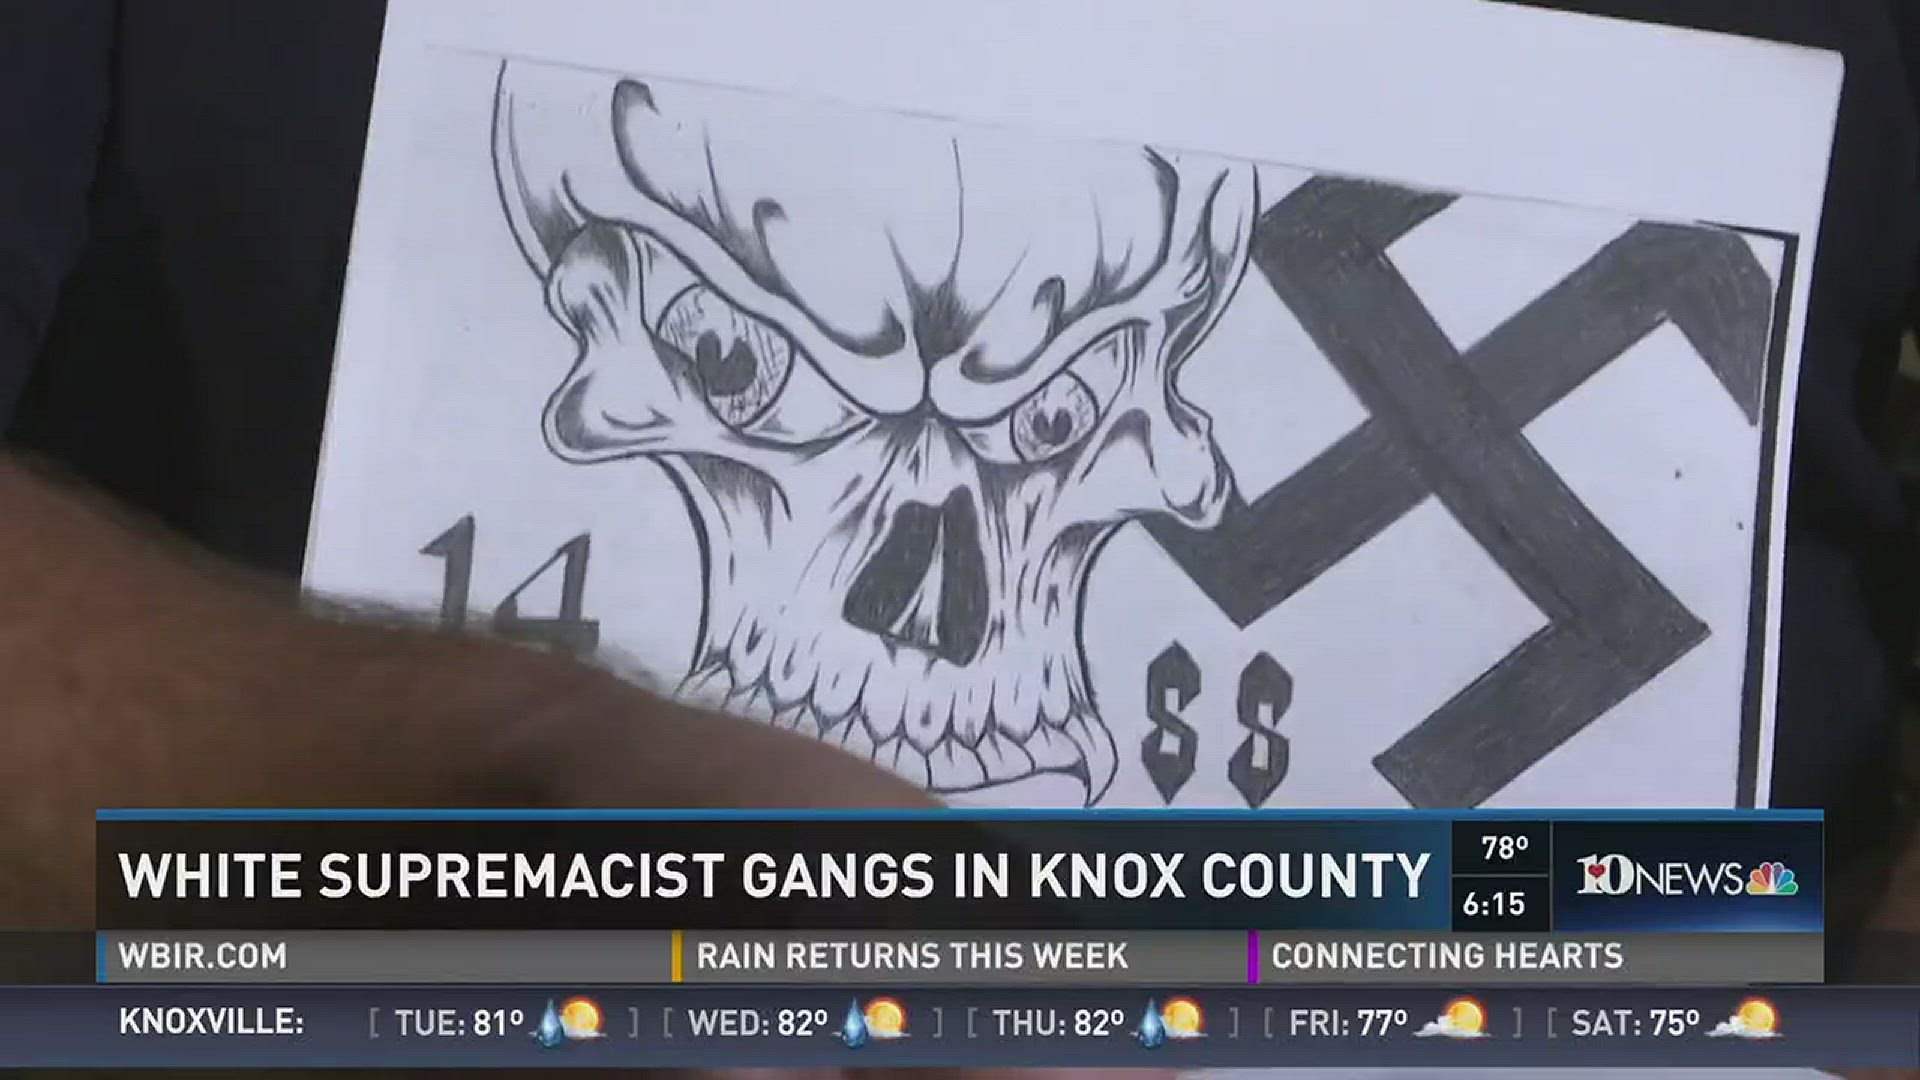 10News anchor Robin Wilhoit explains how Knox County's biggest gang is the Aryan Nation. (5/9/16)